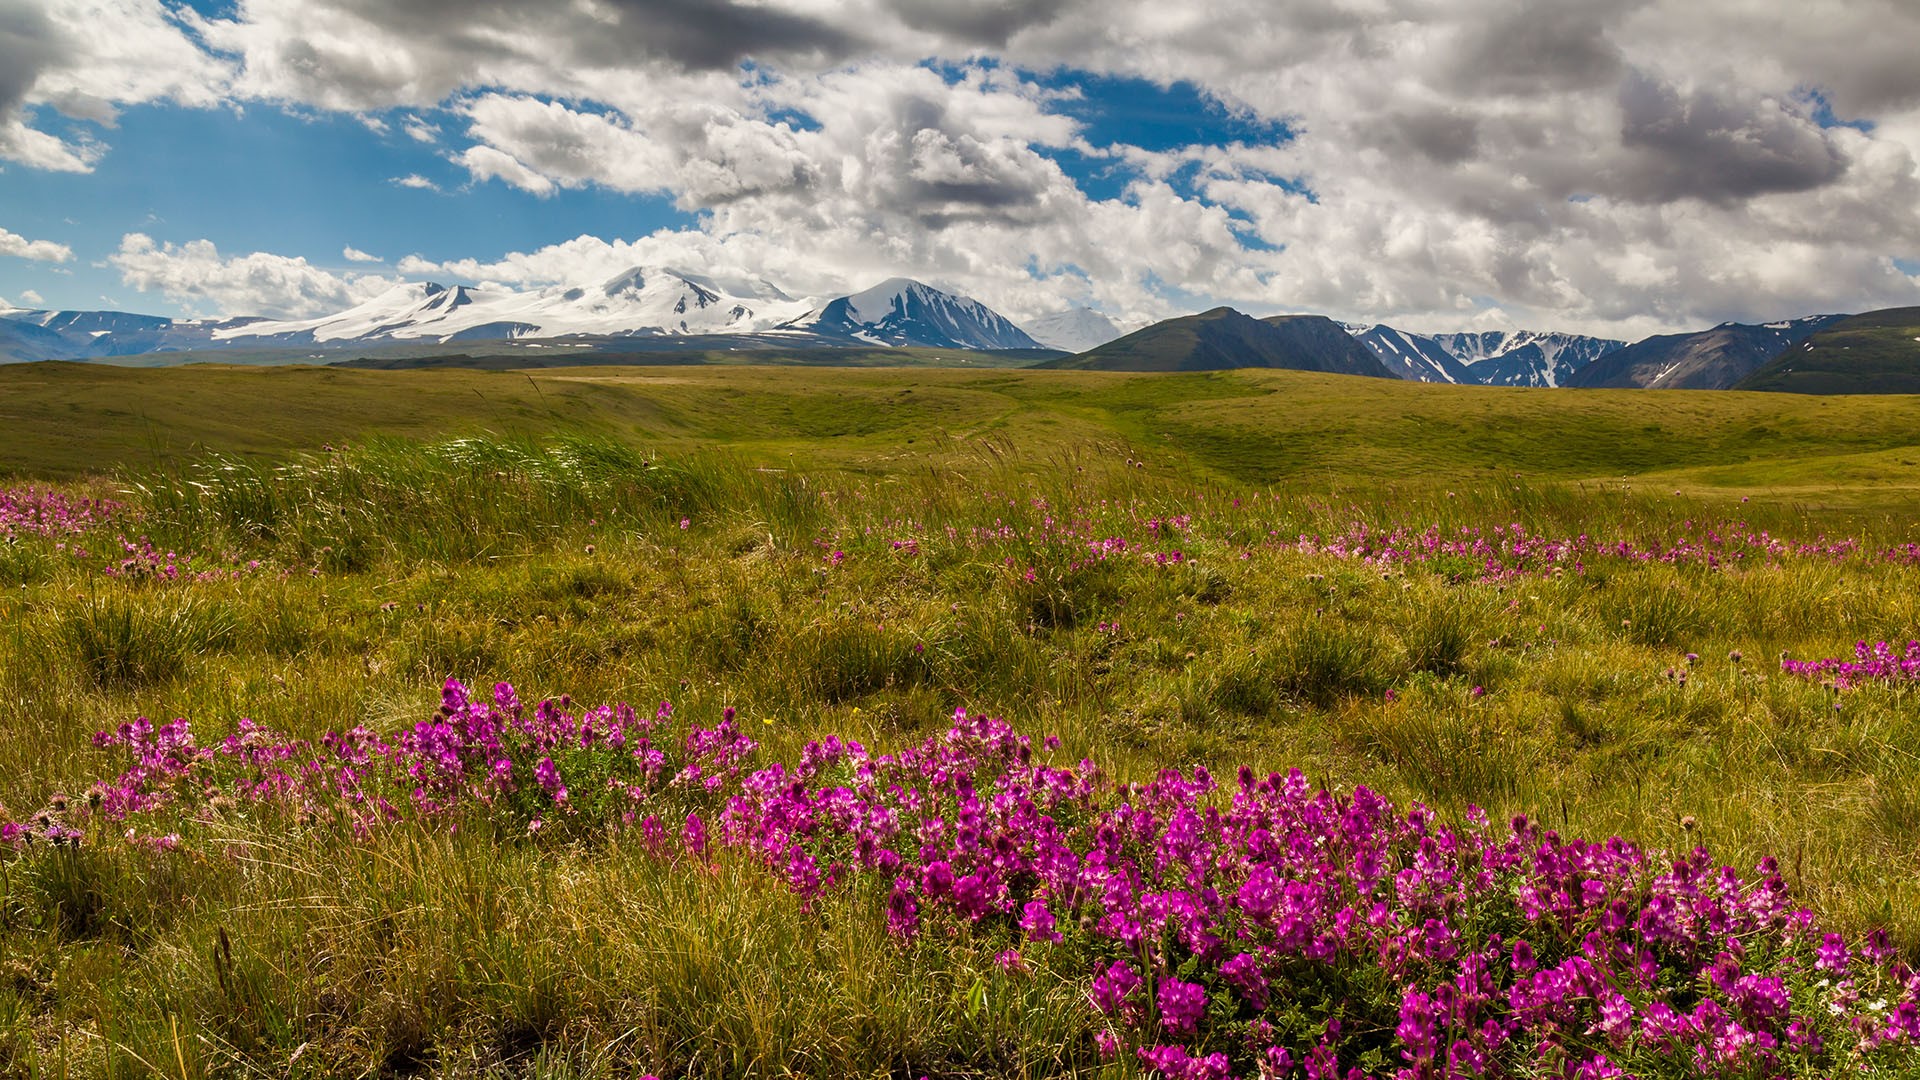 Nature Landscape Far View Clouds Sky Mountains Grass Flowers Pink Flowers Snowy Peak Blooming Field  1920x1080